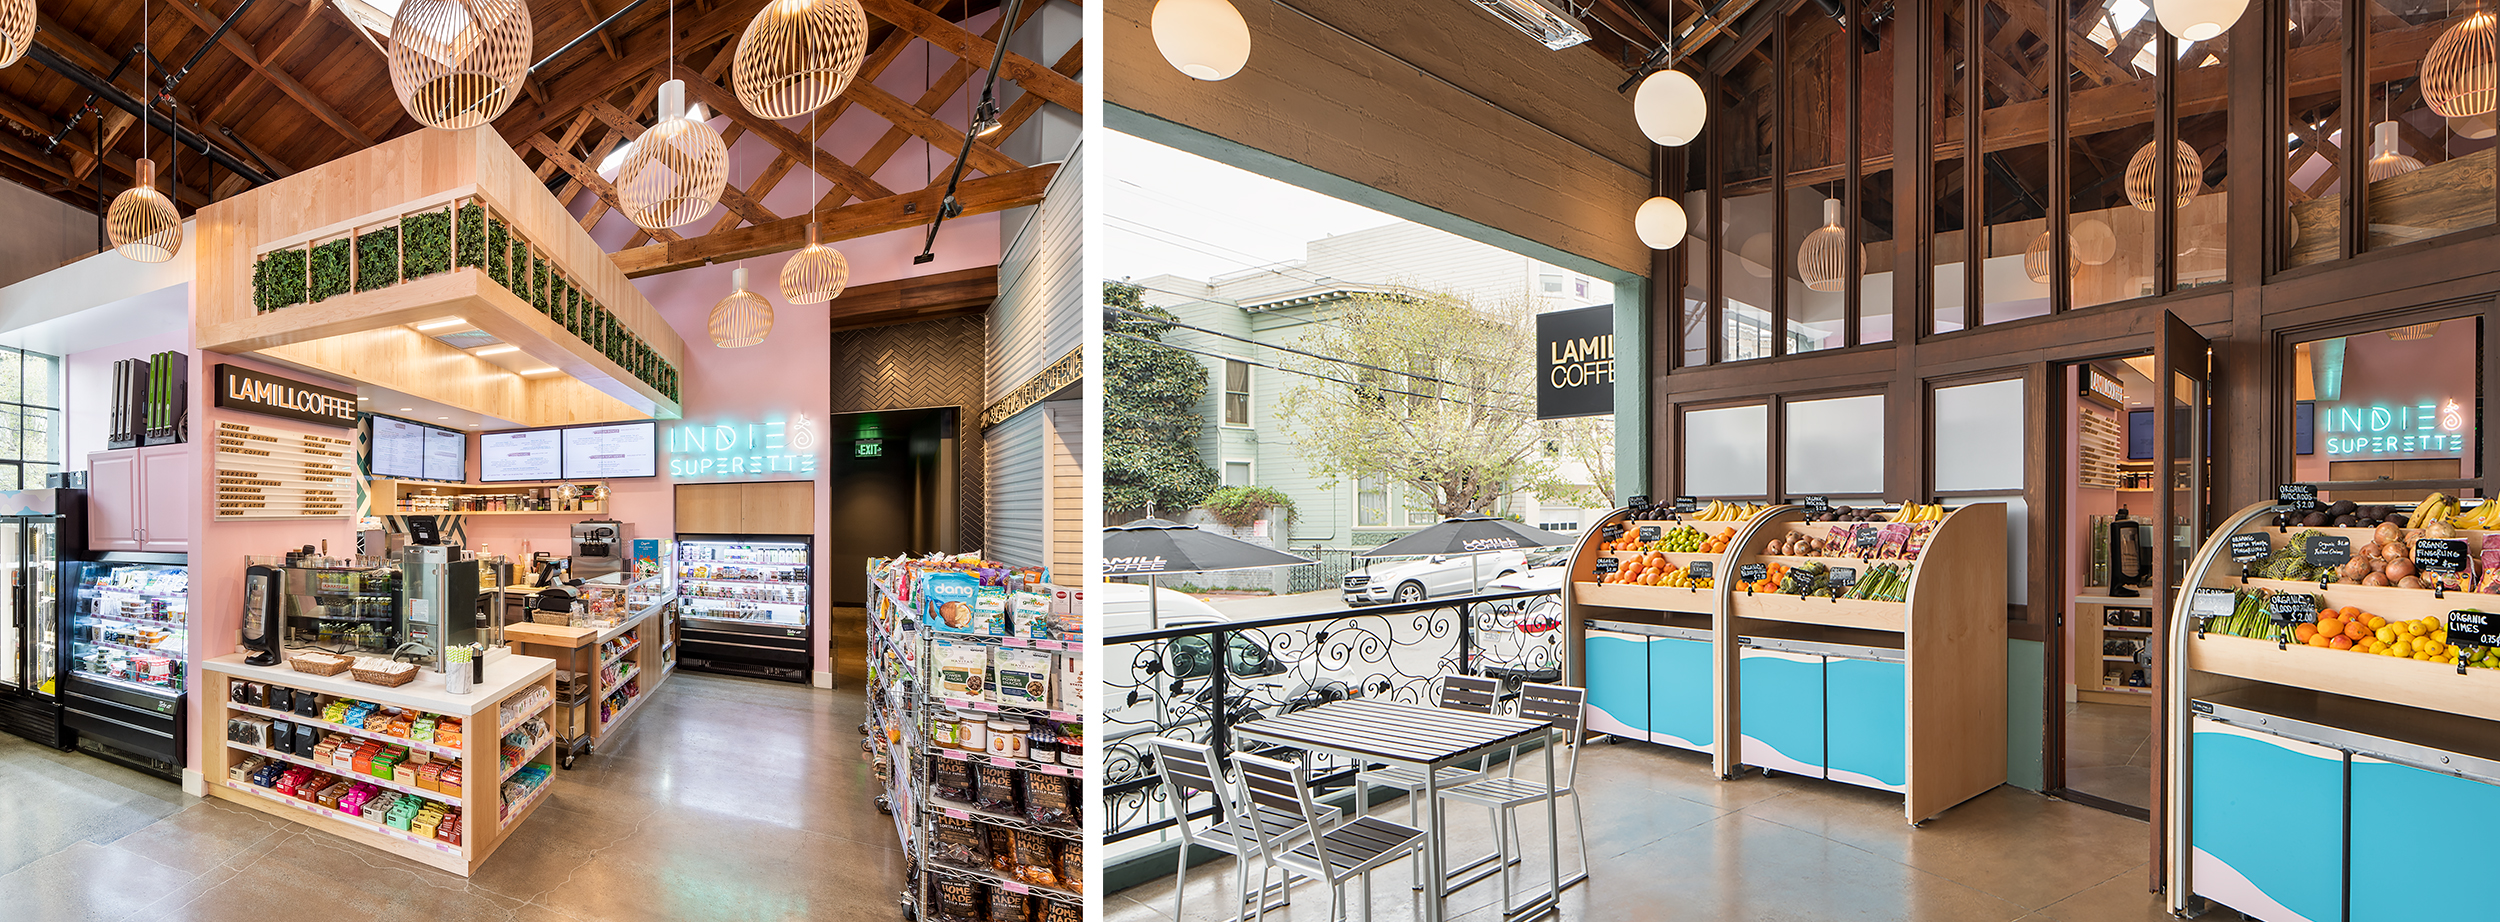 Top Left: With space at a premium, designers took care to keep the store uncluttered and inviting. | Three patio area fruit and vegetable stands do double duty as display and storage fixtures.